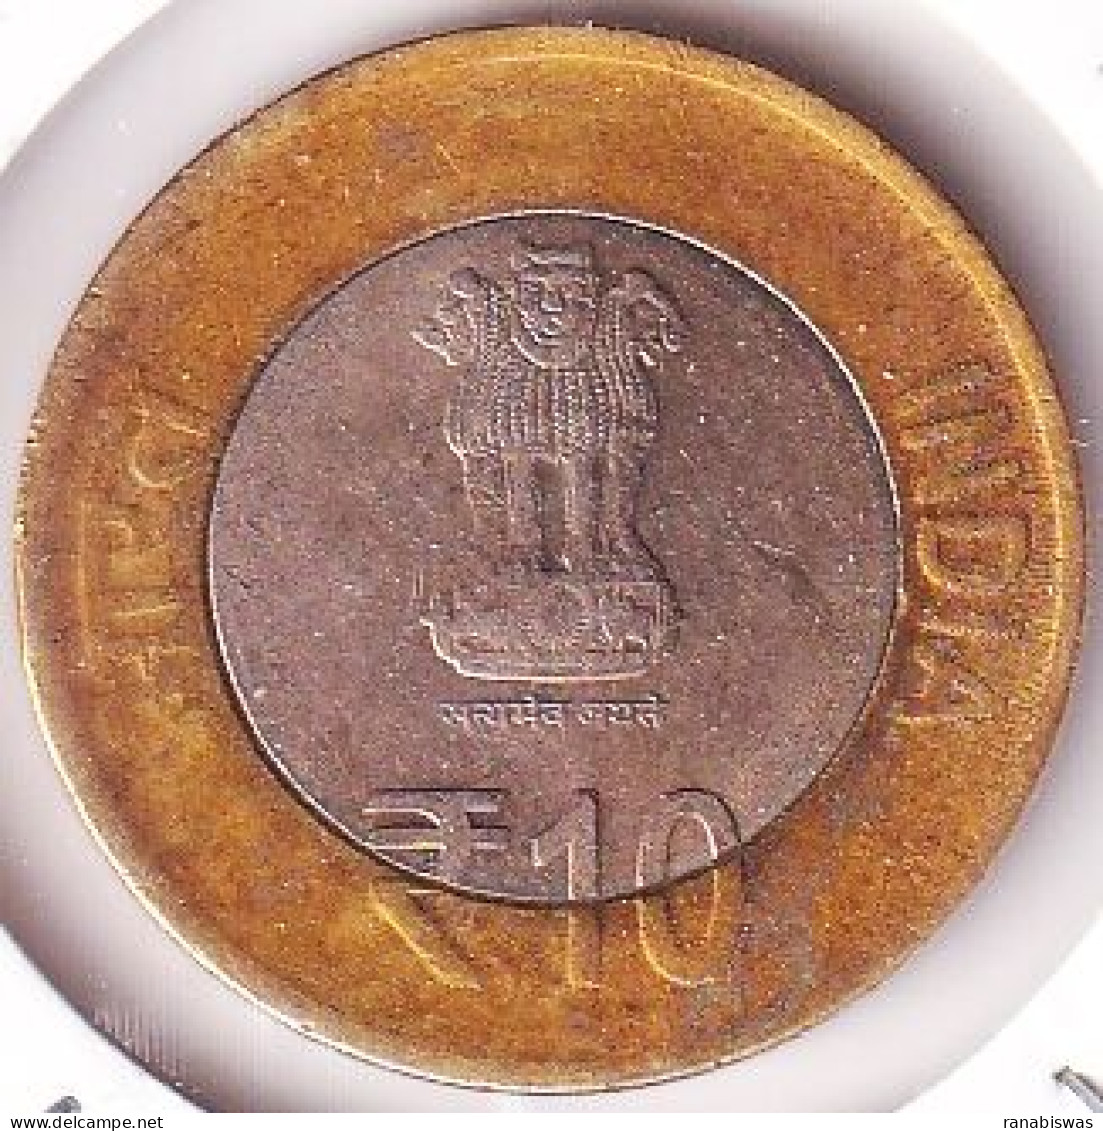 INDIA COIN LOT 446, 10 RUPEES 2013, COIR BOARD, CALCUTTA MINT, XF, SCARE - Indien